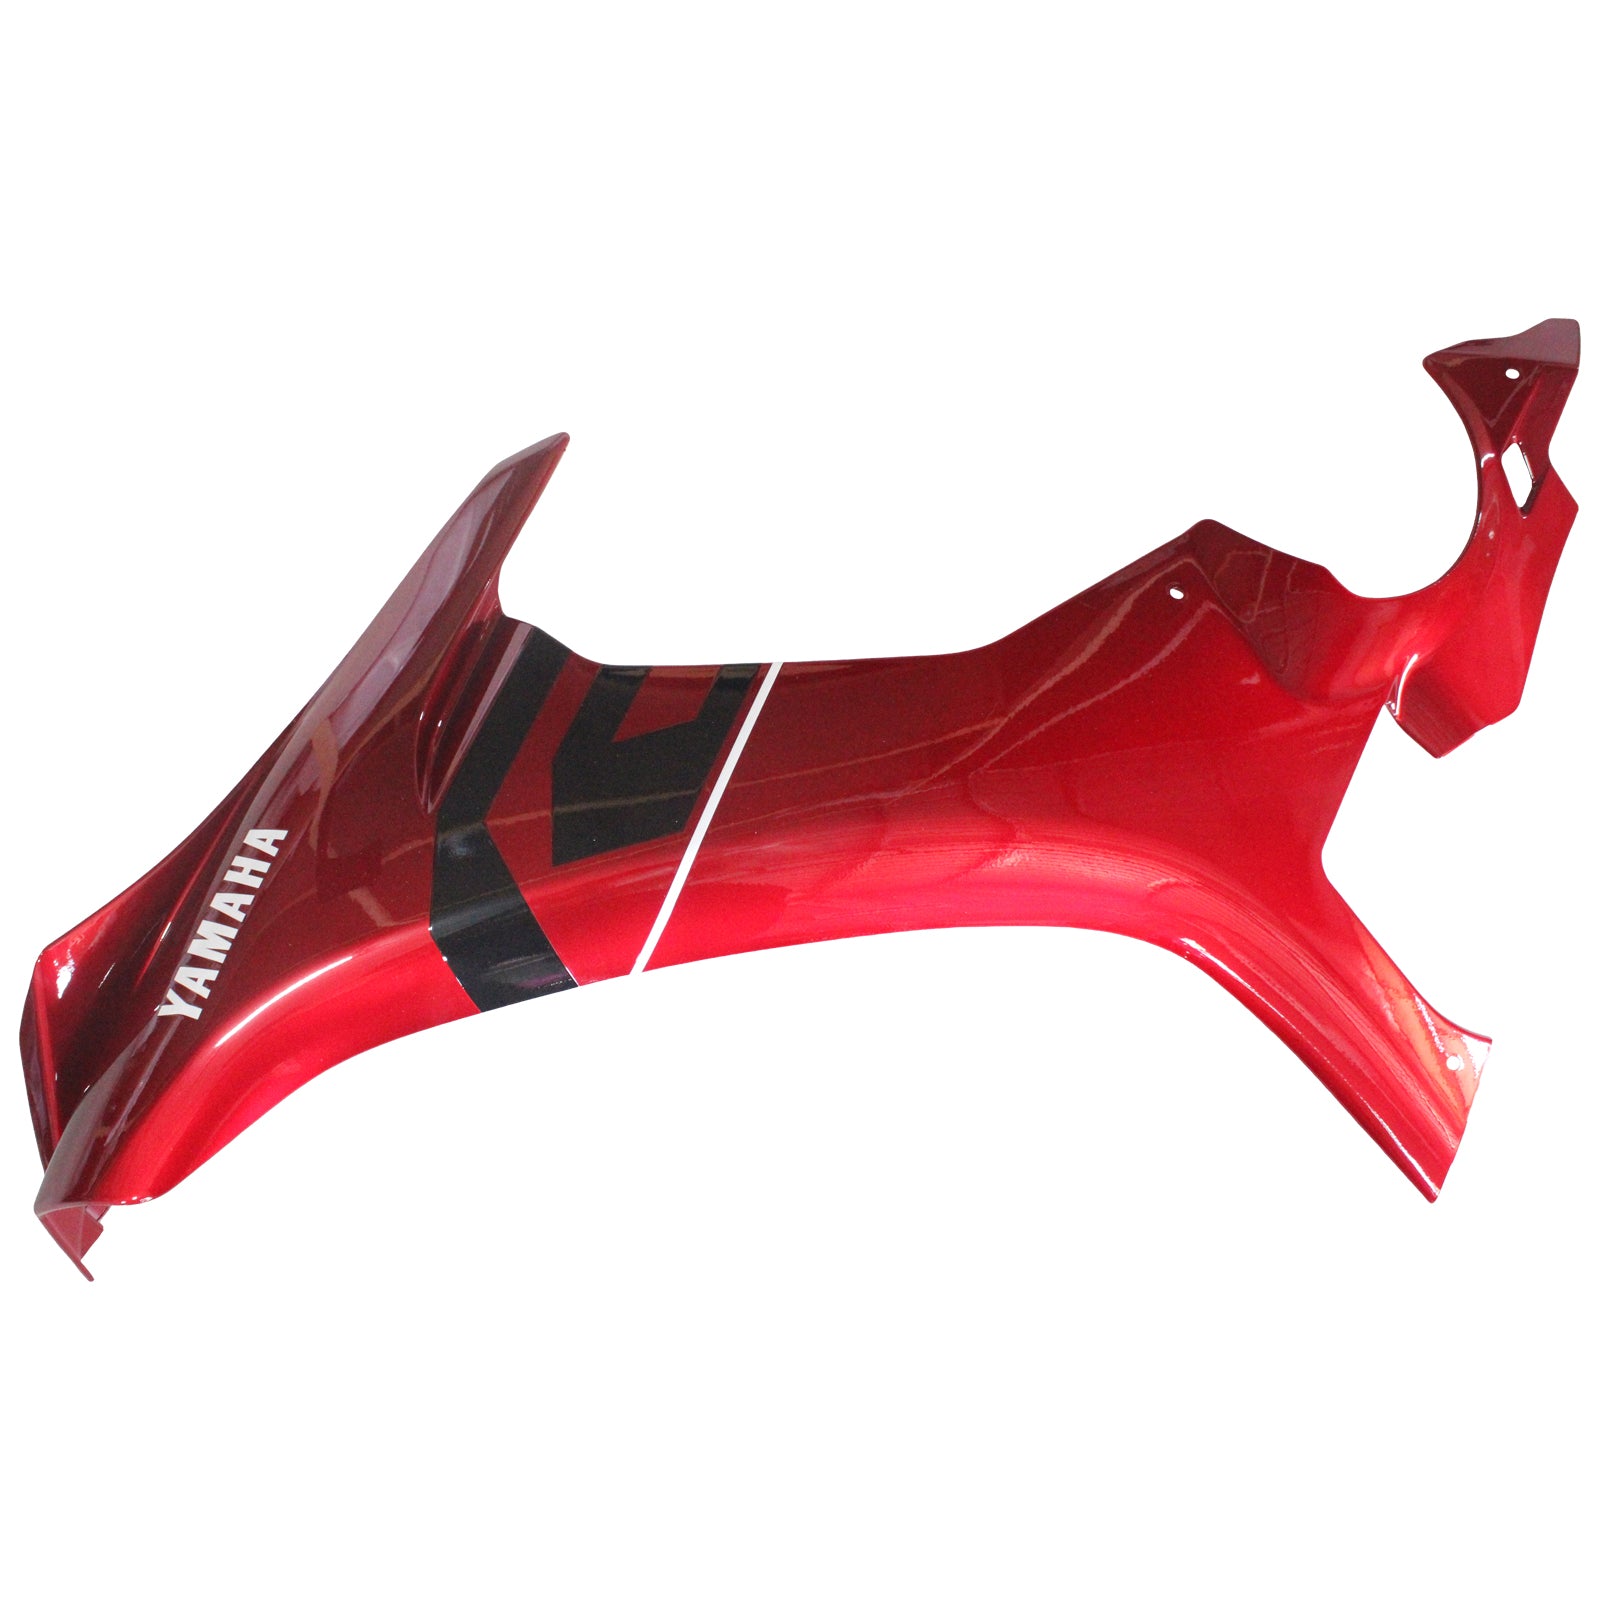 Amotopart Yamaha 2015-2019 YZF 1000 R1 Kit carena rosso scuro lucido